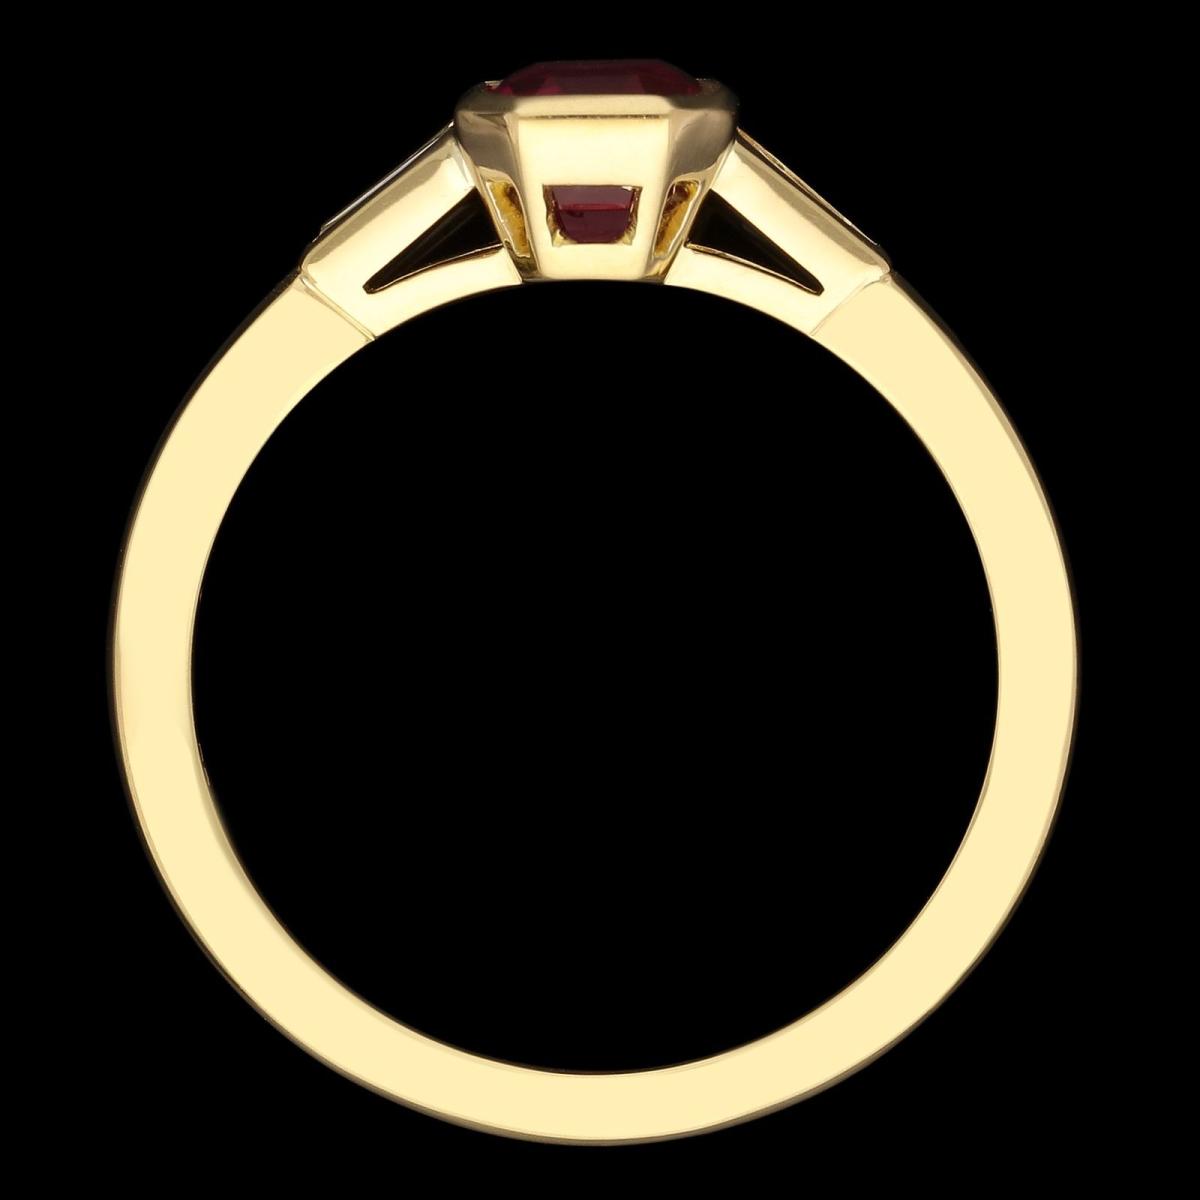 Hancocks 1.09ct Burmese Ruby Ring With Tapered Baguette Diamond Shoulders Contemporary